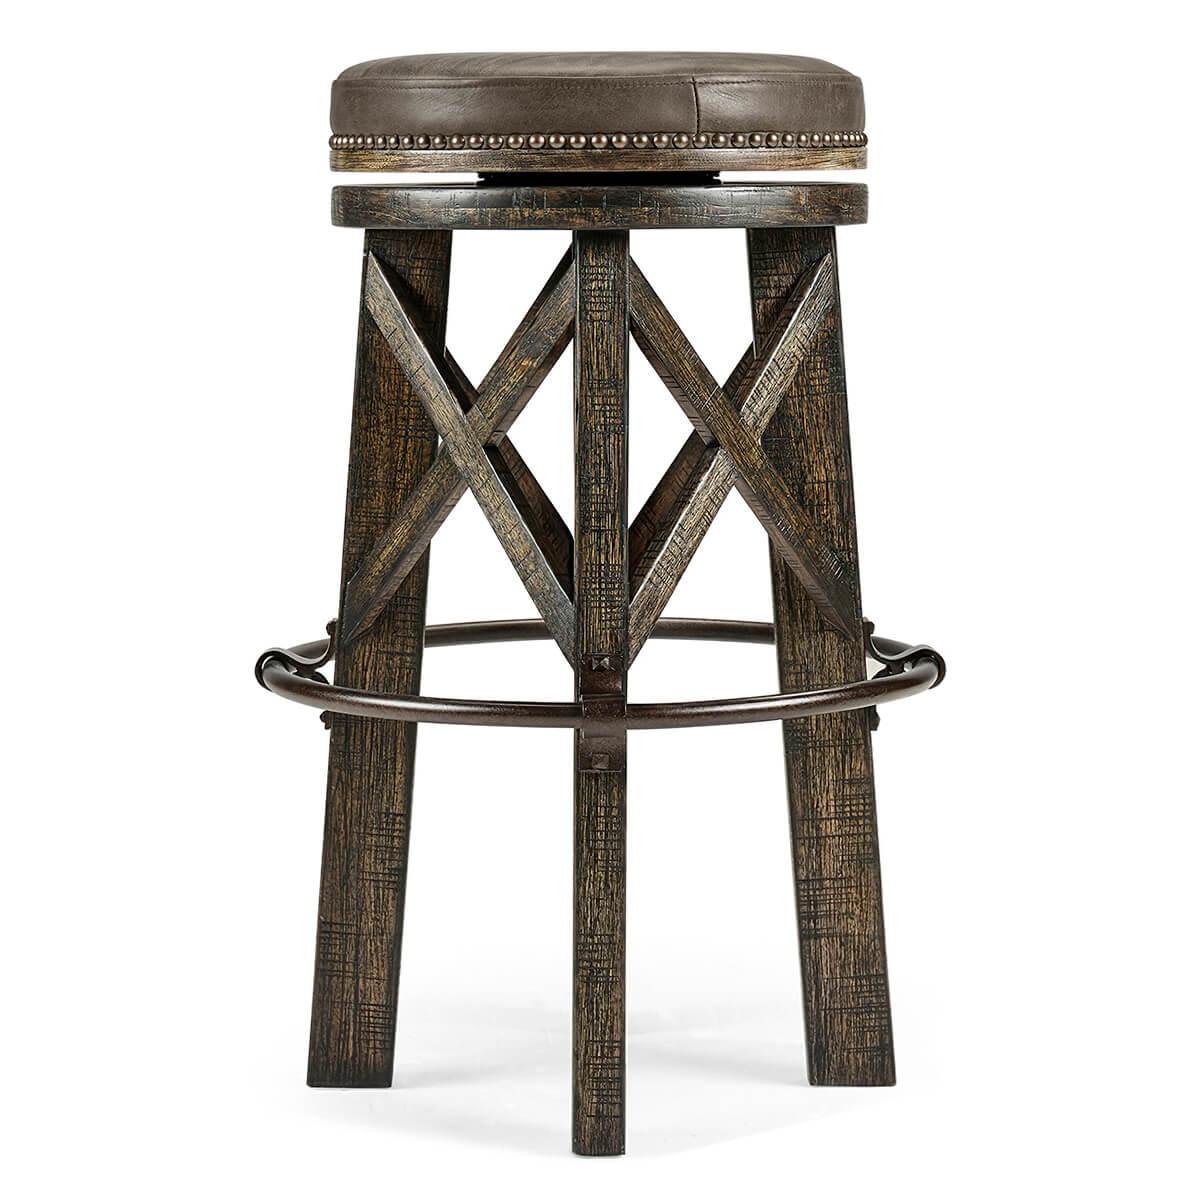 An Industrial modern solid dark driftwood round bar stool, the planked legs with exposed saw marks to the rustic finish, beneath a studded leather twist seat and an iron circular footrest.
 

Dimensions: 20